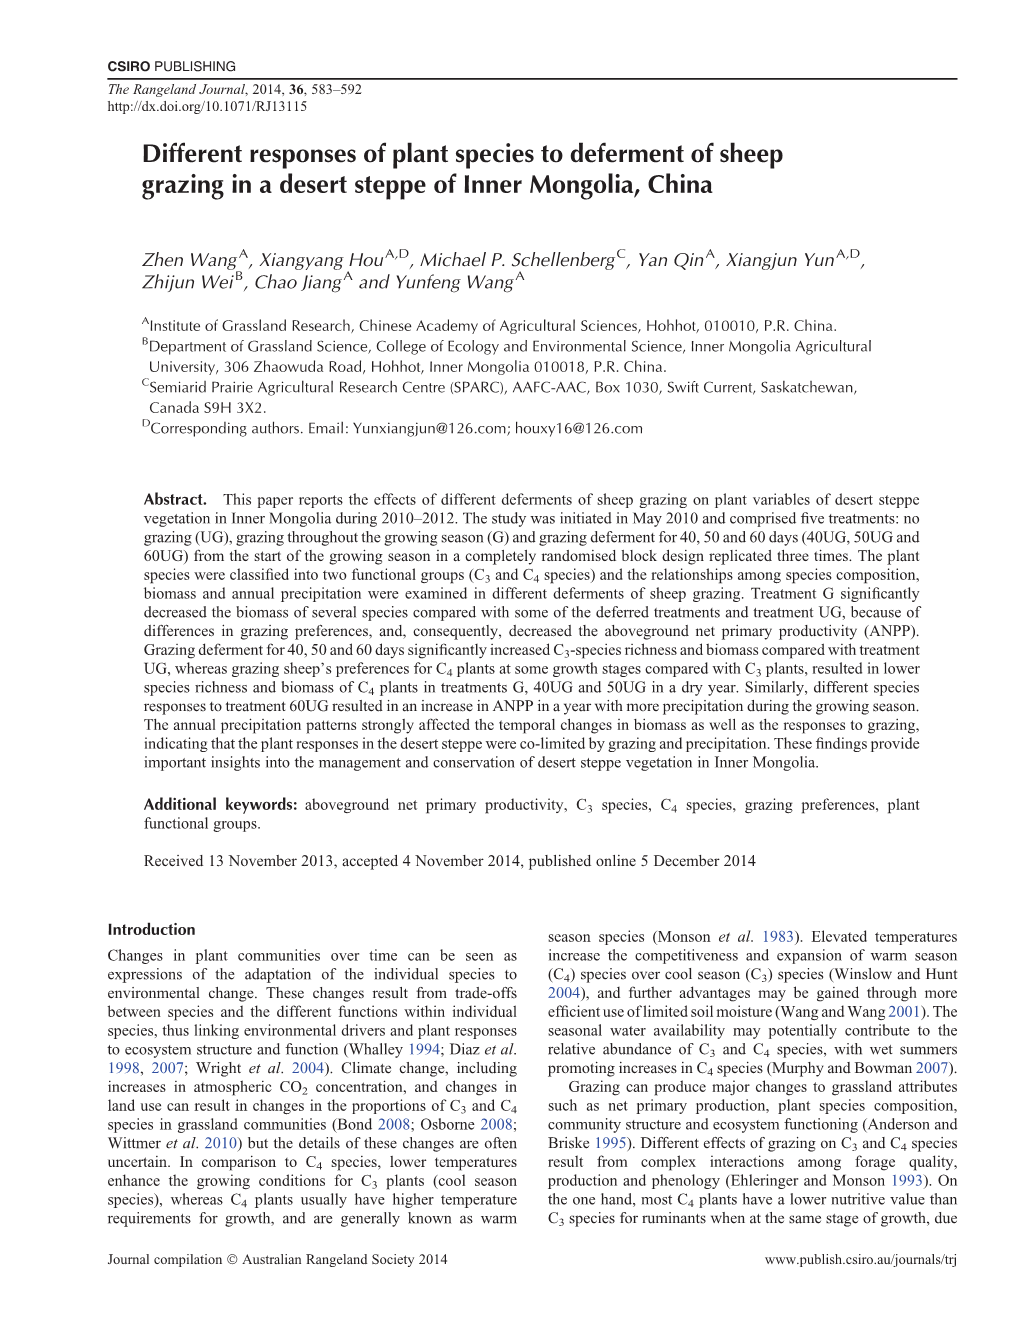 Different Responses of Plant Species to Deferment of Sheep Grazing in a Desert Steppe of Inner Mongolia, China